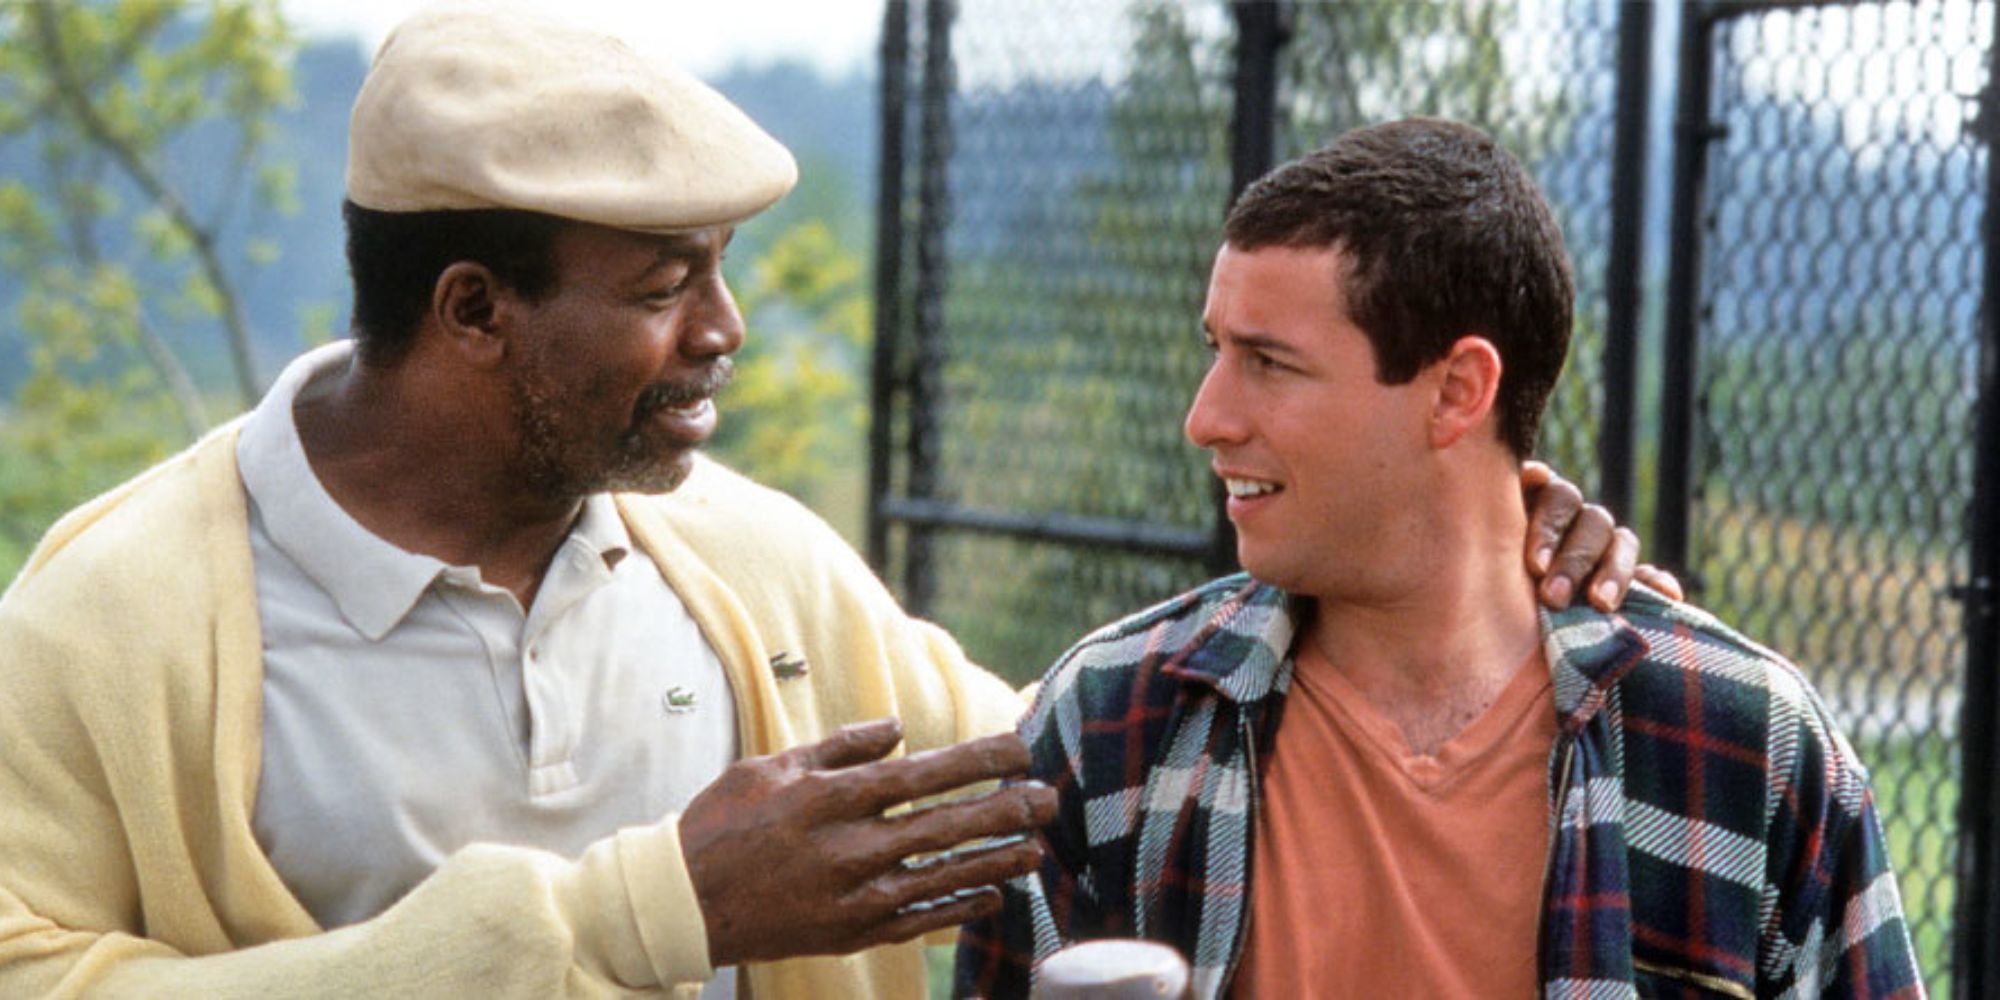 From 'Uncut Gems' to '50 First Dates' Adam Sandler's Top 10 Movies